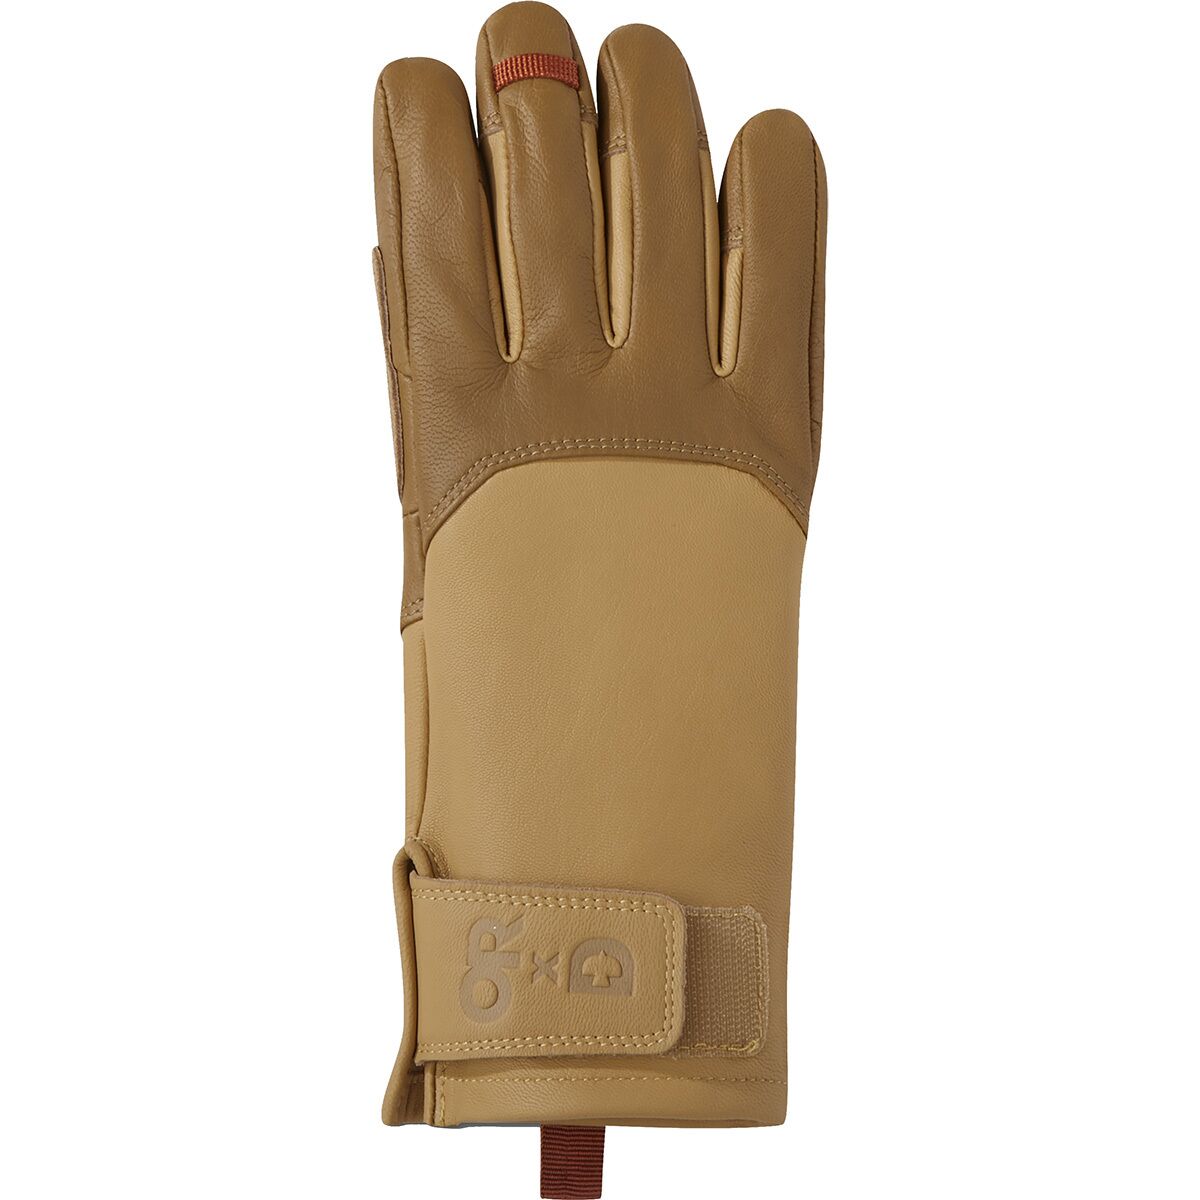 Outdoor Research x Dovetail Leather Field Glove - Women's